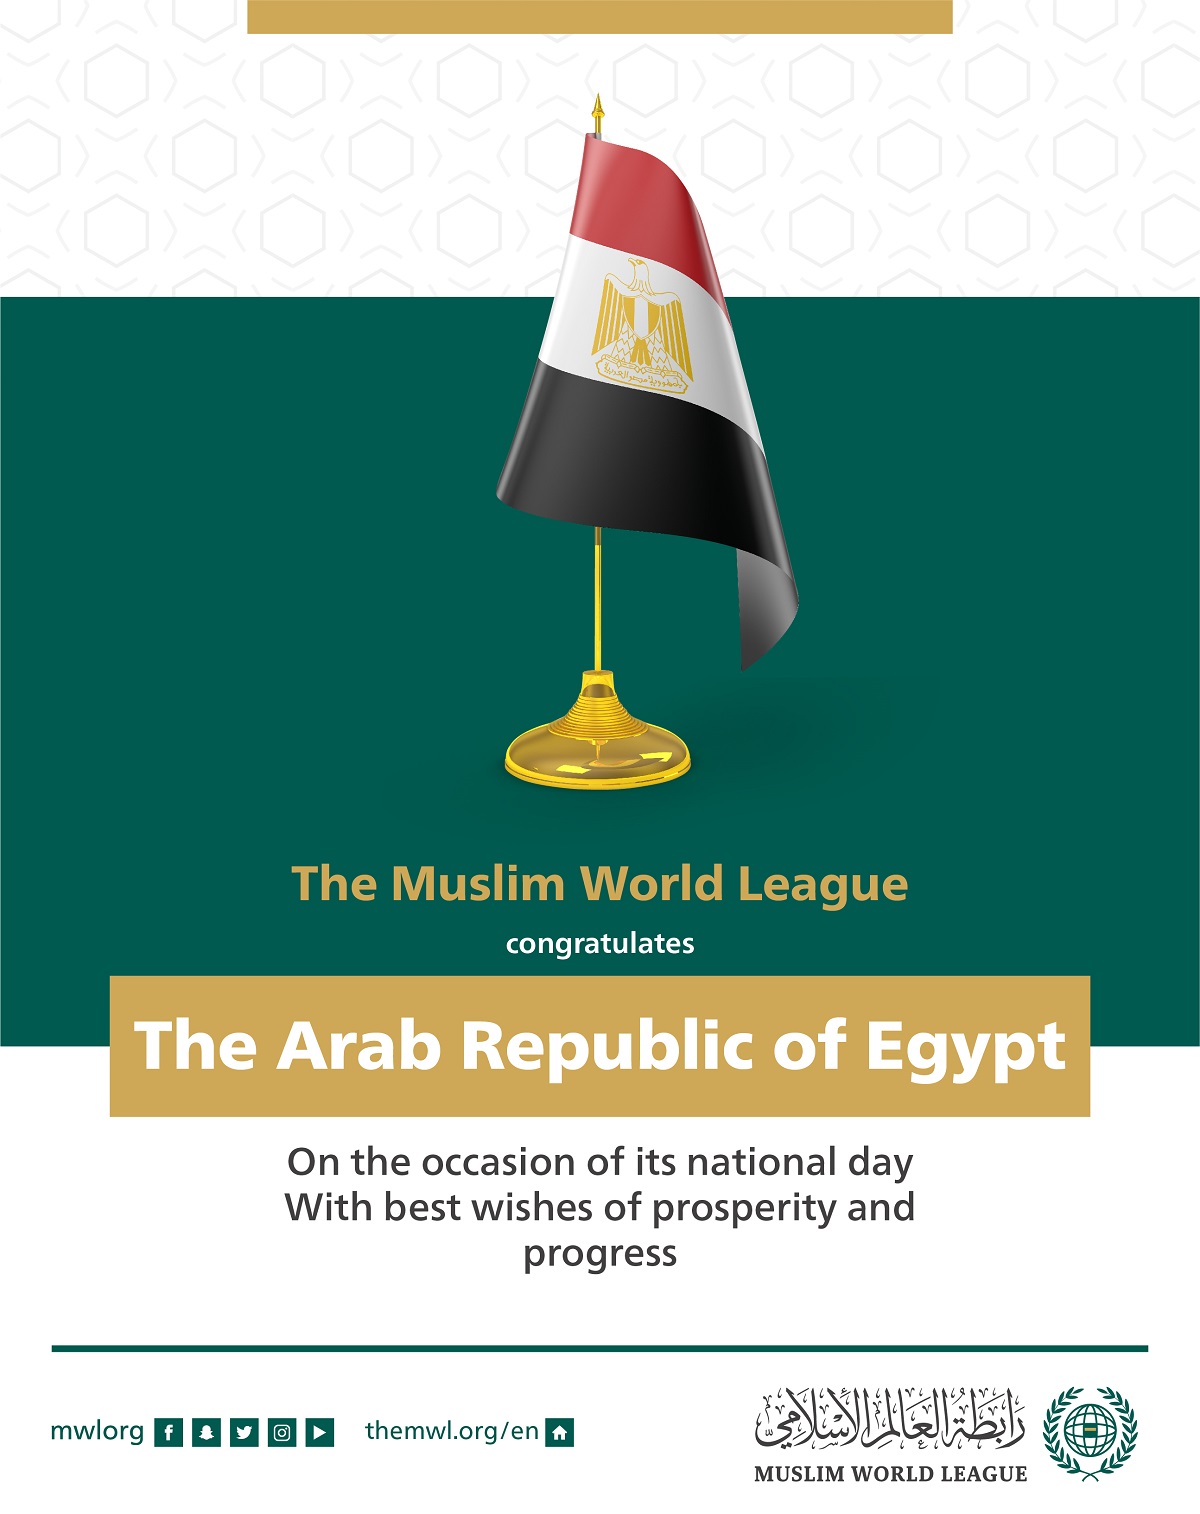 The Muslim World League congratulates the Arab Republic of Egypt on its National Day